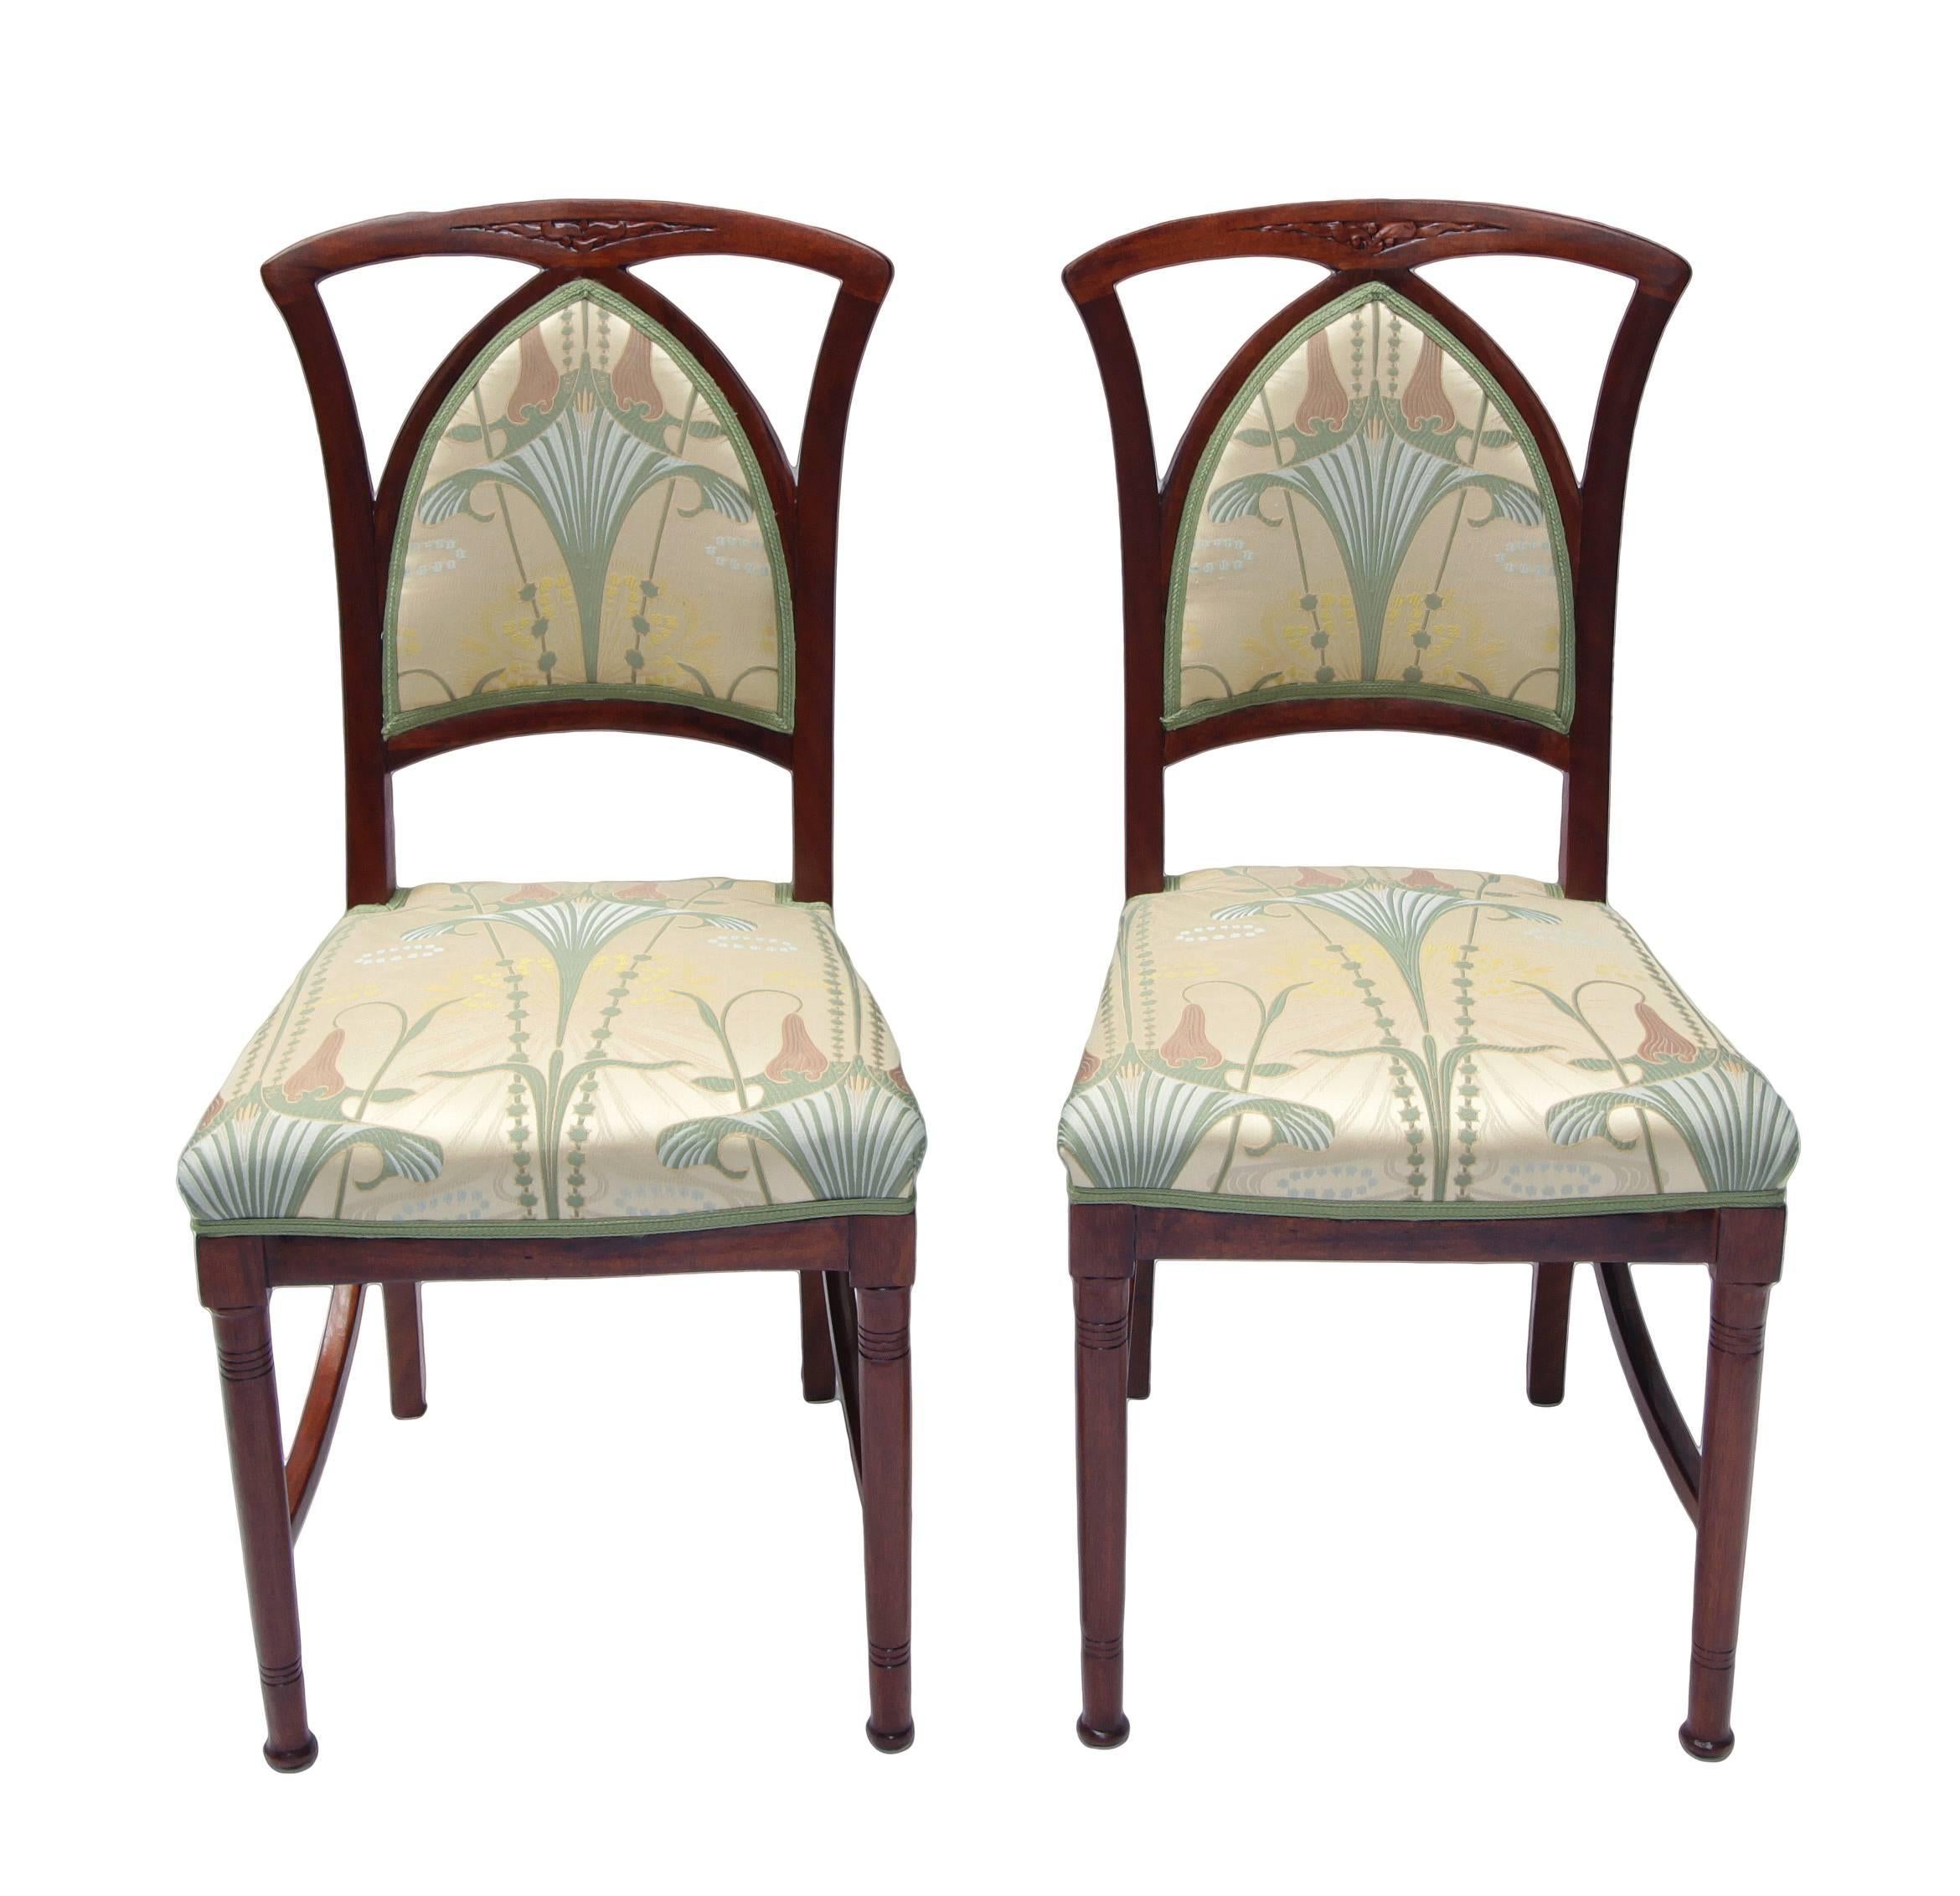 This lounge set consists of two side chairs, two-arm armchairs, and one sofa from the Art Nouveau period and is made from mahogany. The set has completely new upholstered with an Art Nouveau fabric according to a design by Atelier Ruepp from Paris